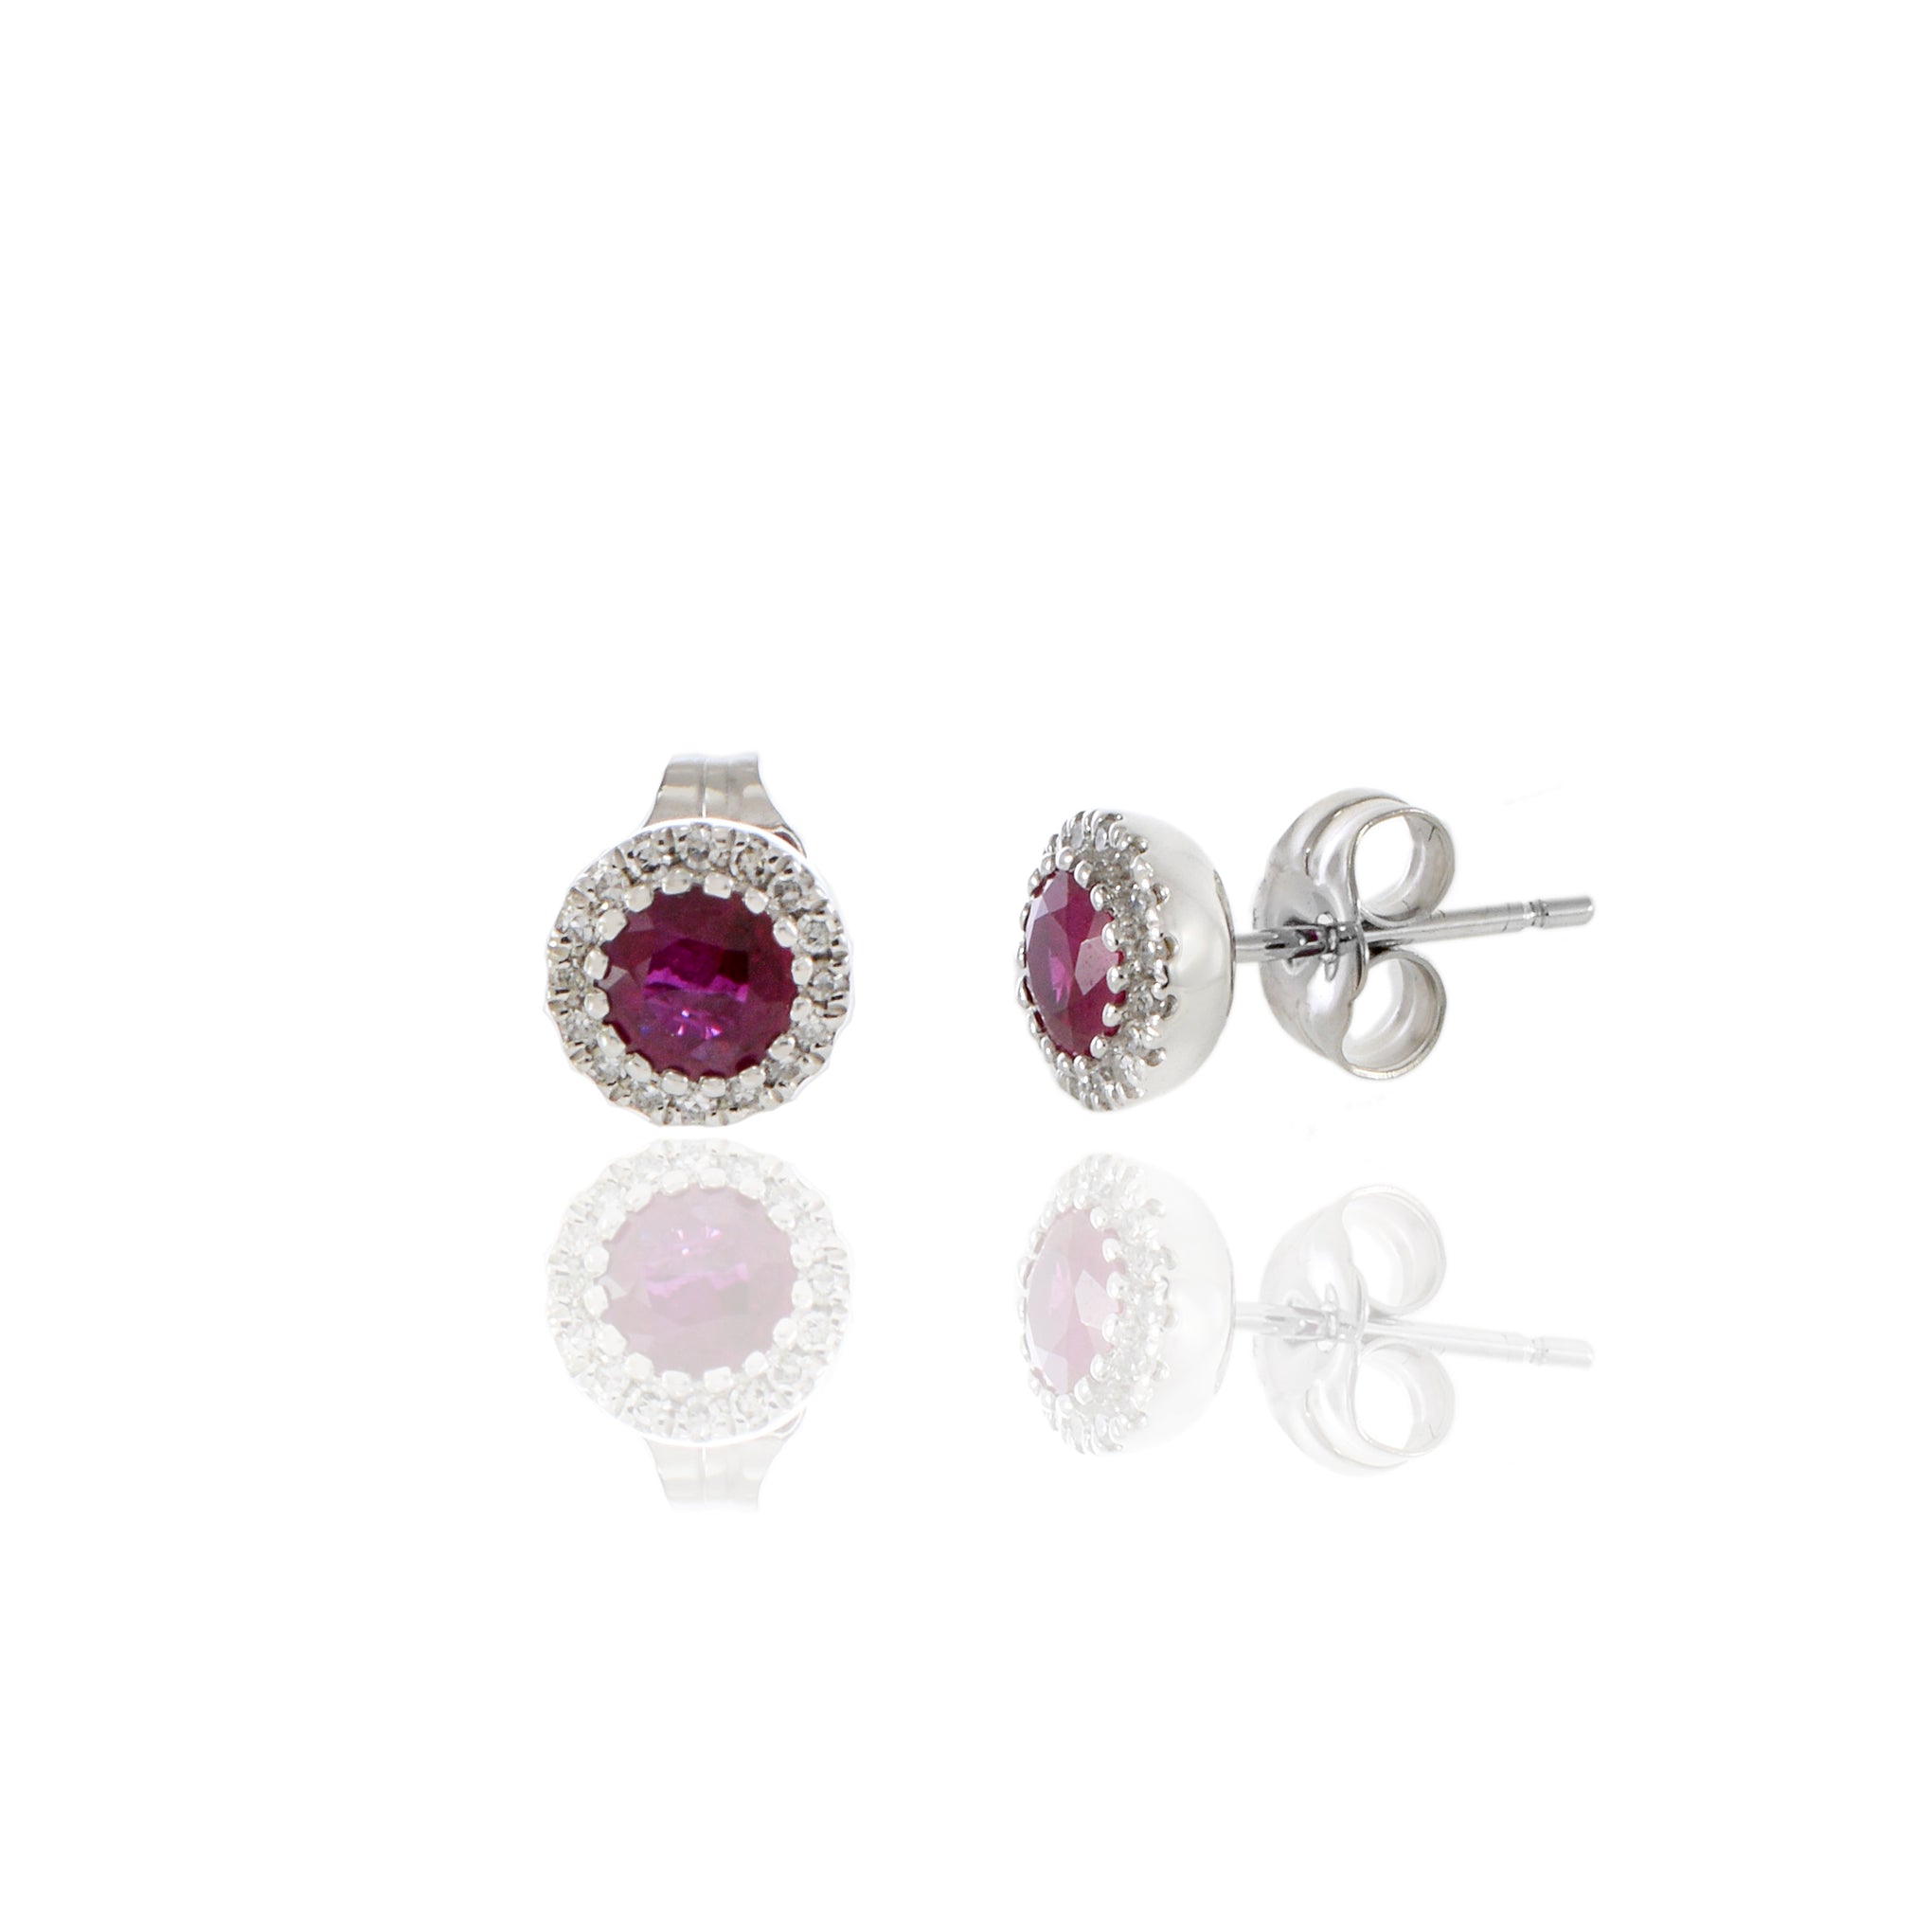 14KT White Gold Round Ruby And Diamond Earrings